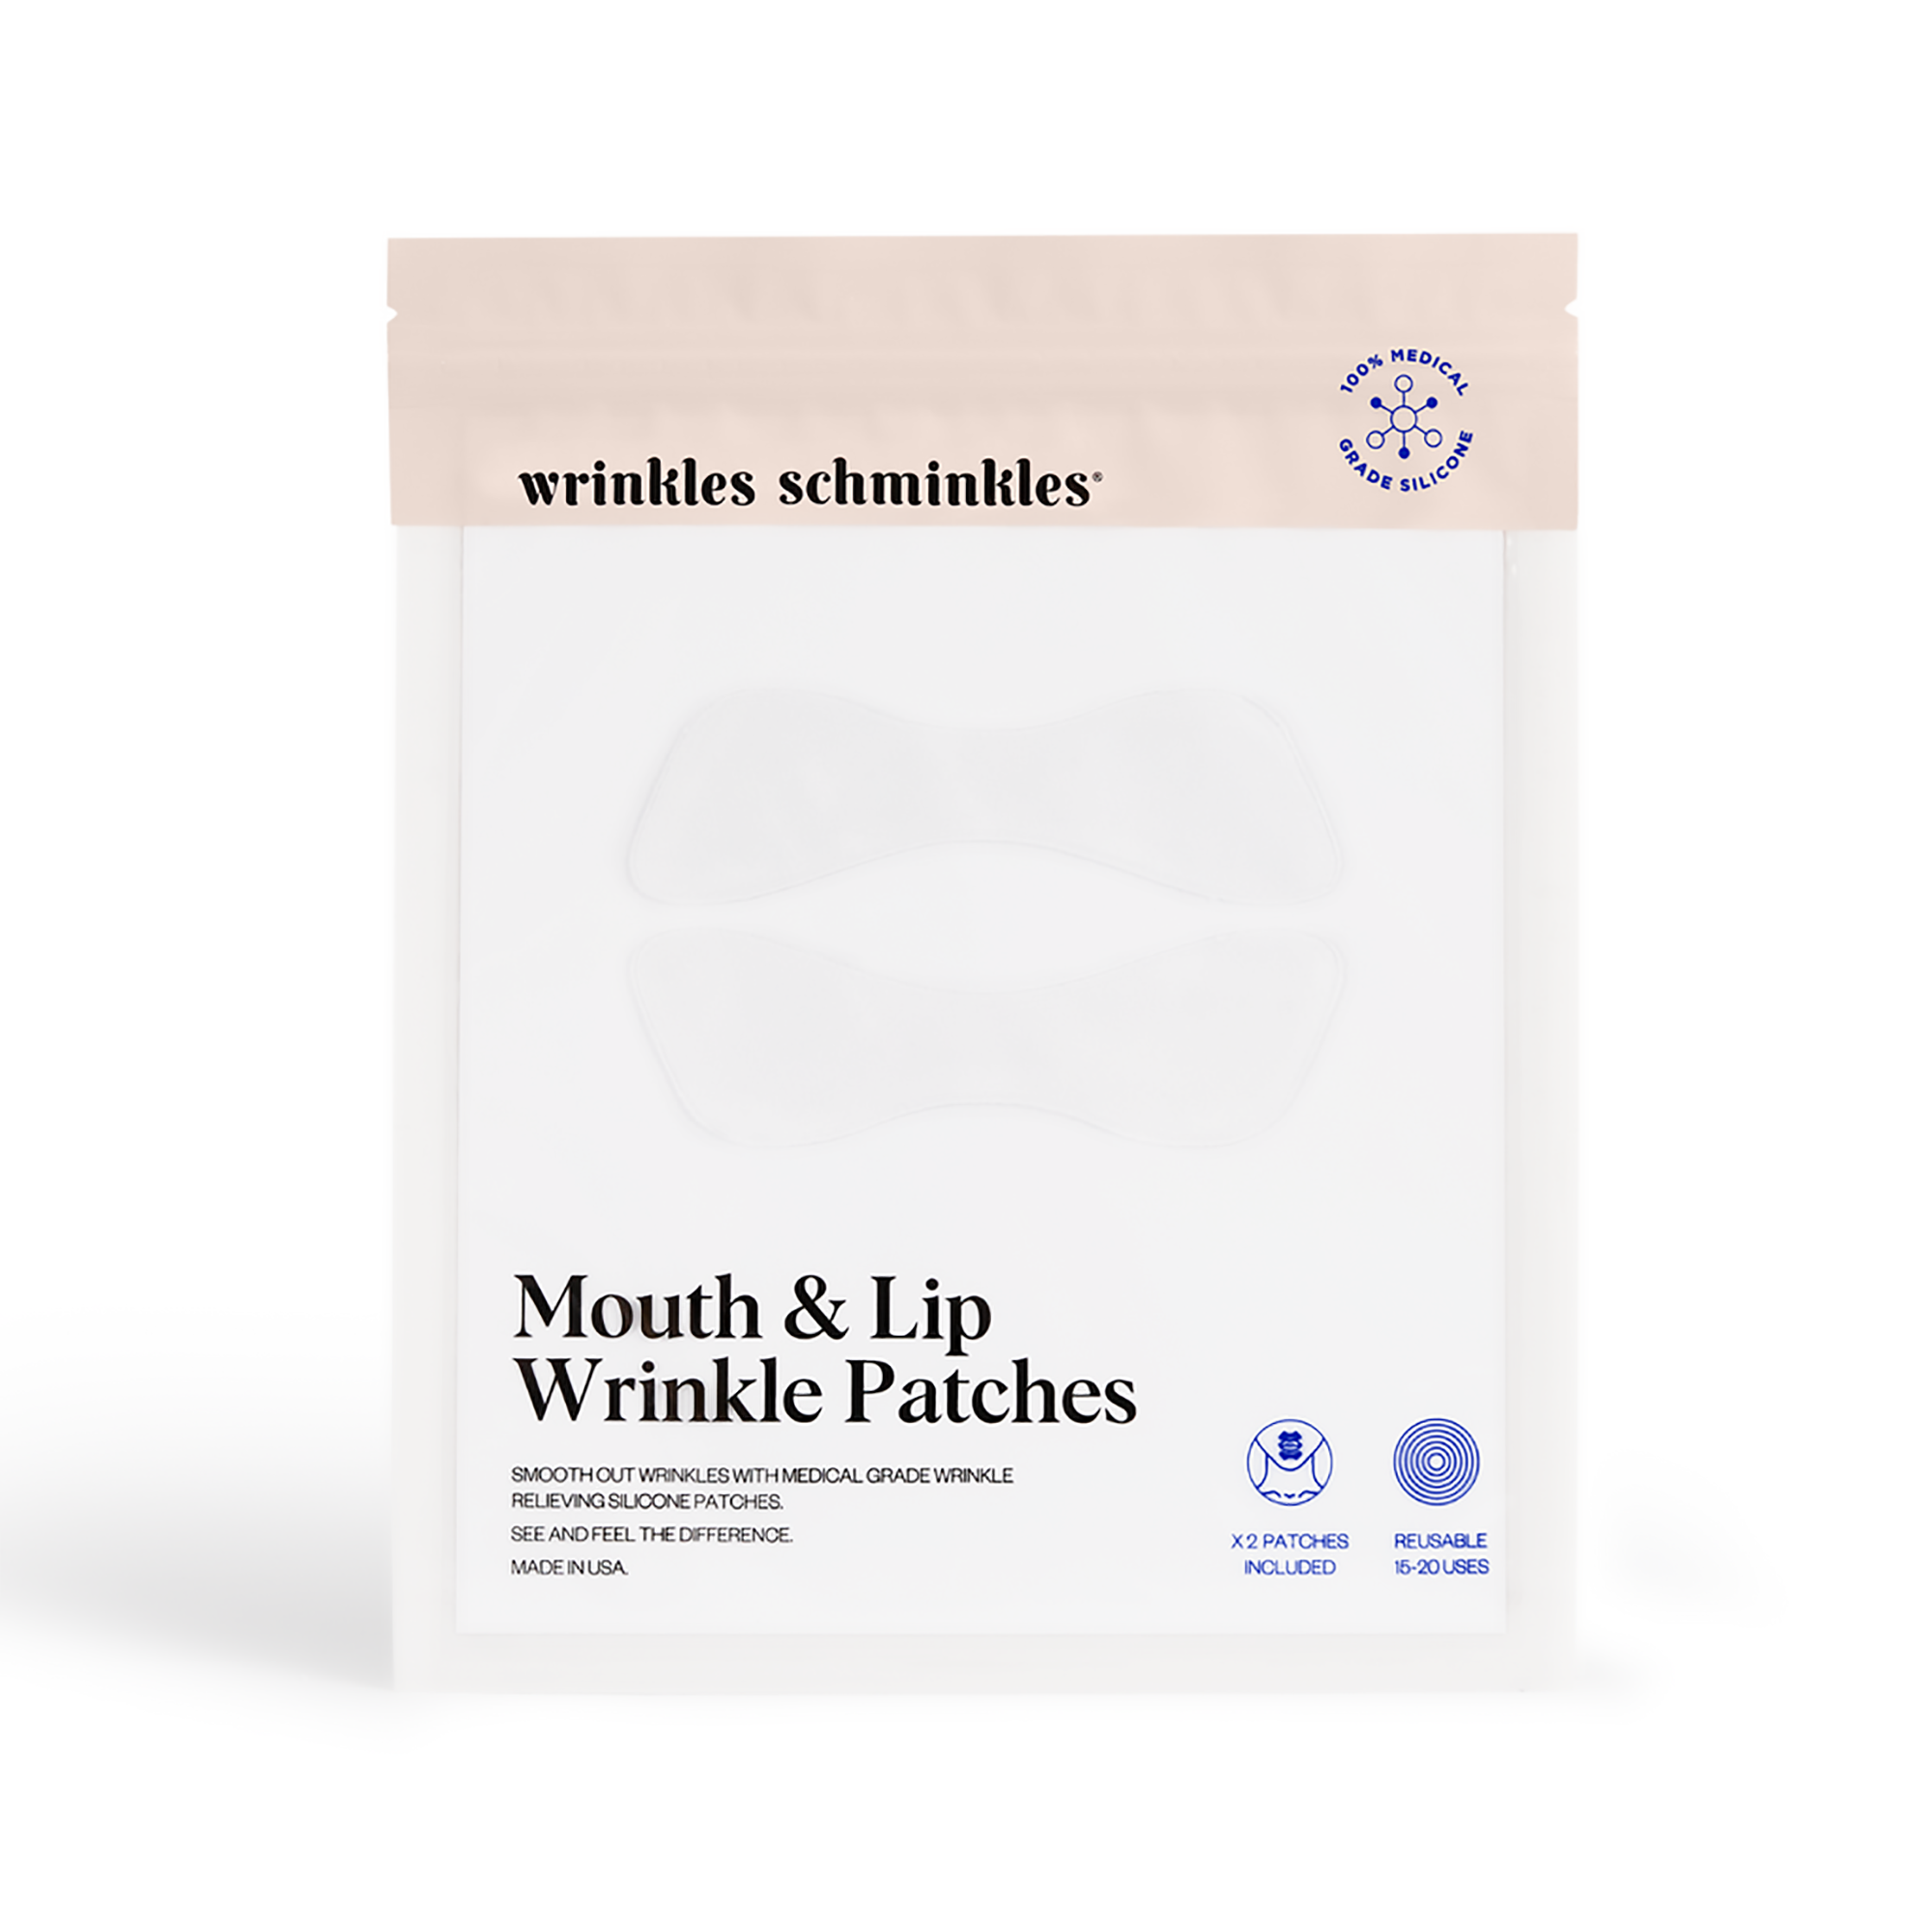 Wrinkle Schminkles Mouth & Lip Wrinkle Patches - 2pc